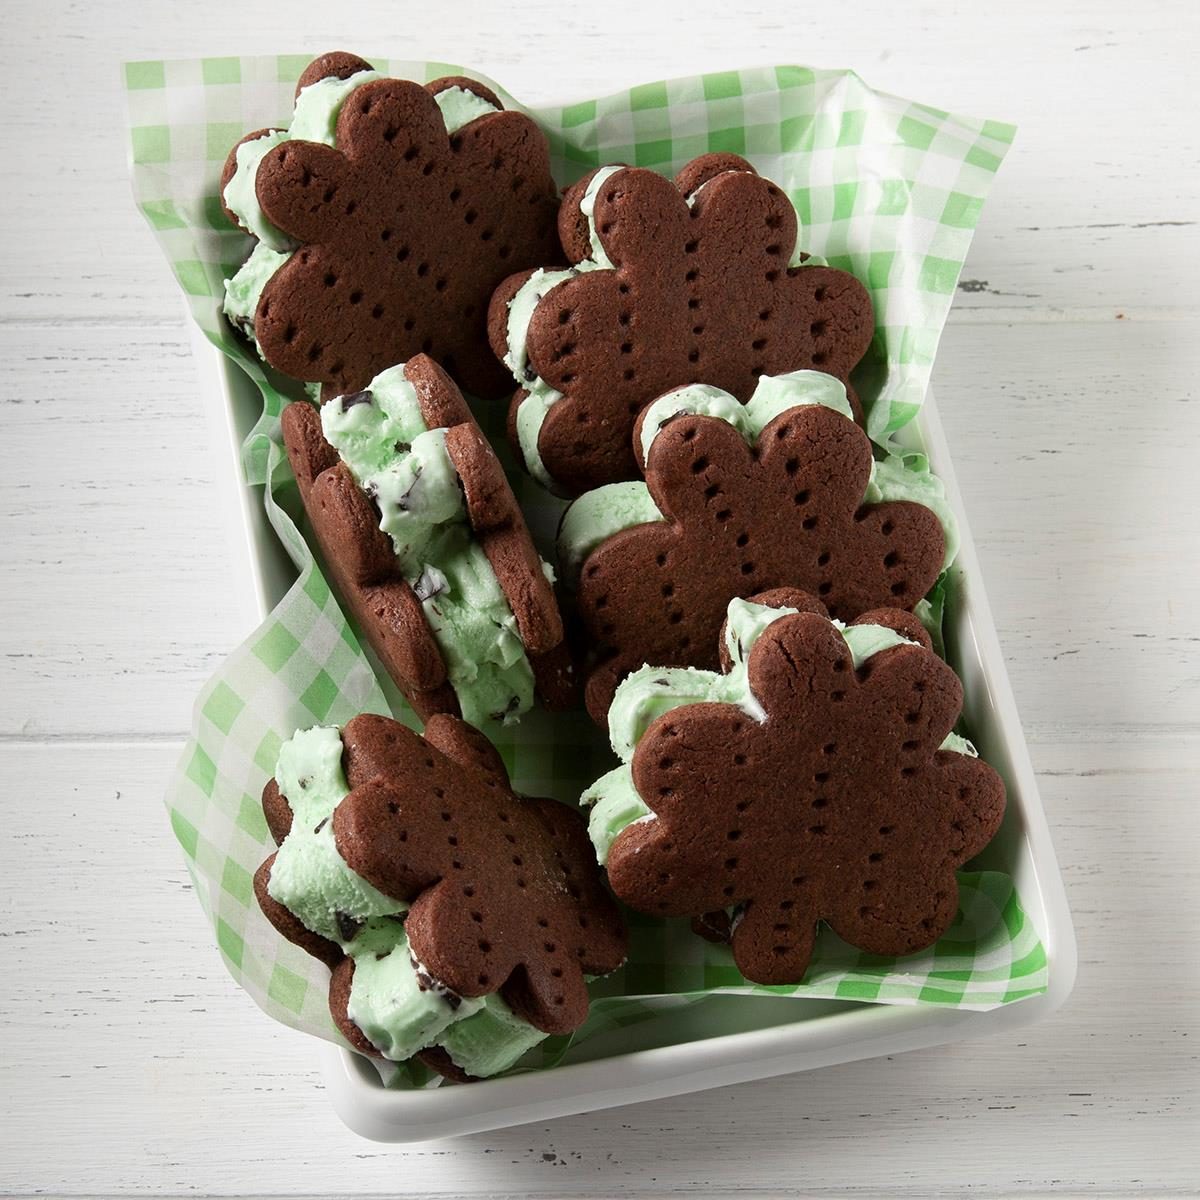 <p>With a soft, chewy chocolate cookie and festive mint shamrock ice cream, these fun desserts are a sweet delight on St. Patrick's Day. You can cut out the cookie wafers in any shape you choose and use any flavor ice cream. Try heart shapes for Valentine's Day filled with strawberry ice cream. —Beverly Coyde, Gasport, New York</p> <div class="listicle-page__buttons"> <div class="listicle-page__cta-button"><a href='https://www.tasteofhome.com/recipes/minty-ice-cream-shamrocks/'>Go to Recipe</a></div> </div>